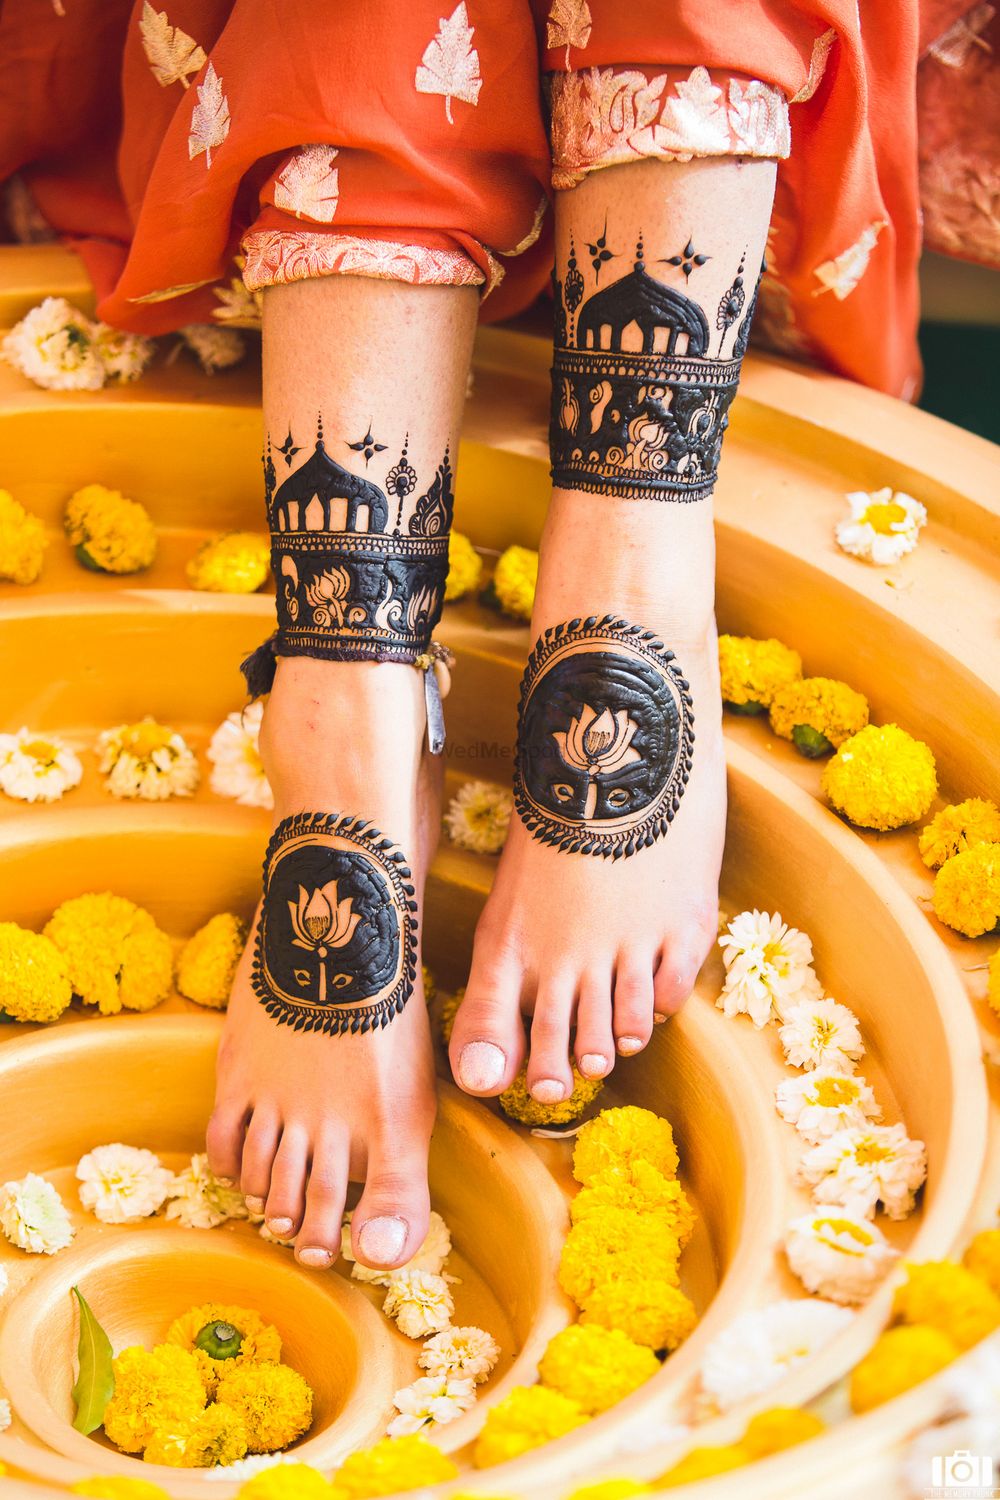 Photo of Feet Mehendi design with lotus motifs & tomb-like structures.